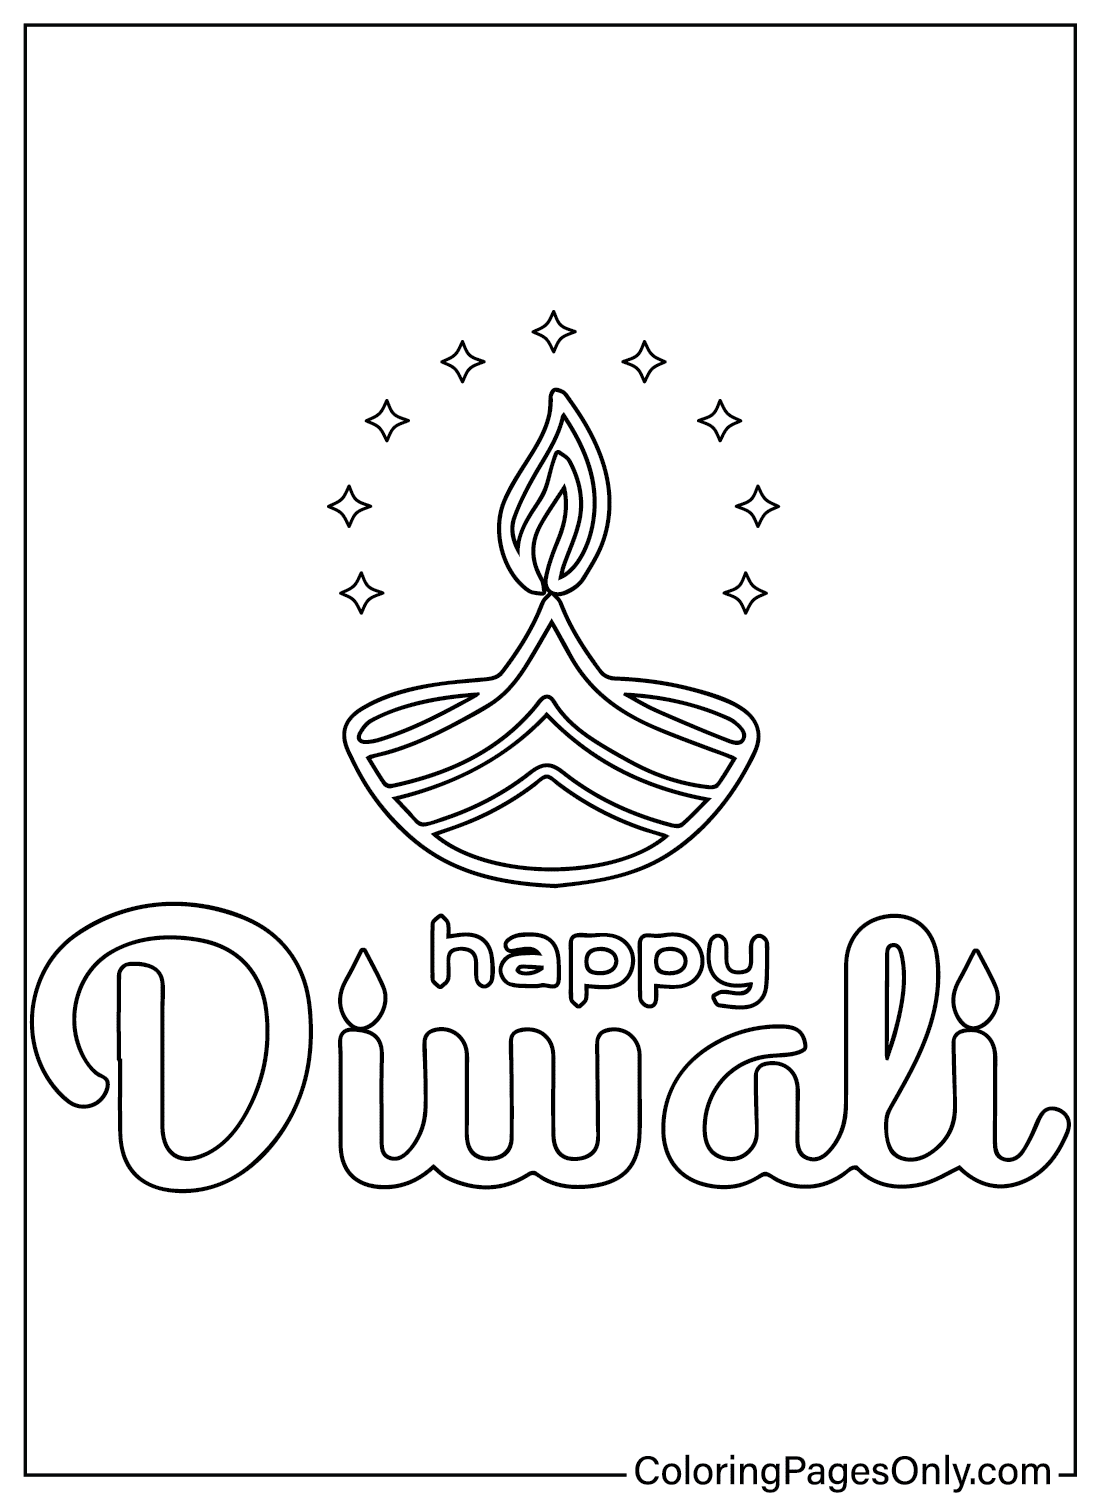 Coloring Page for Diwali from Diwali